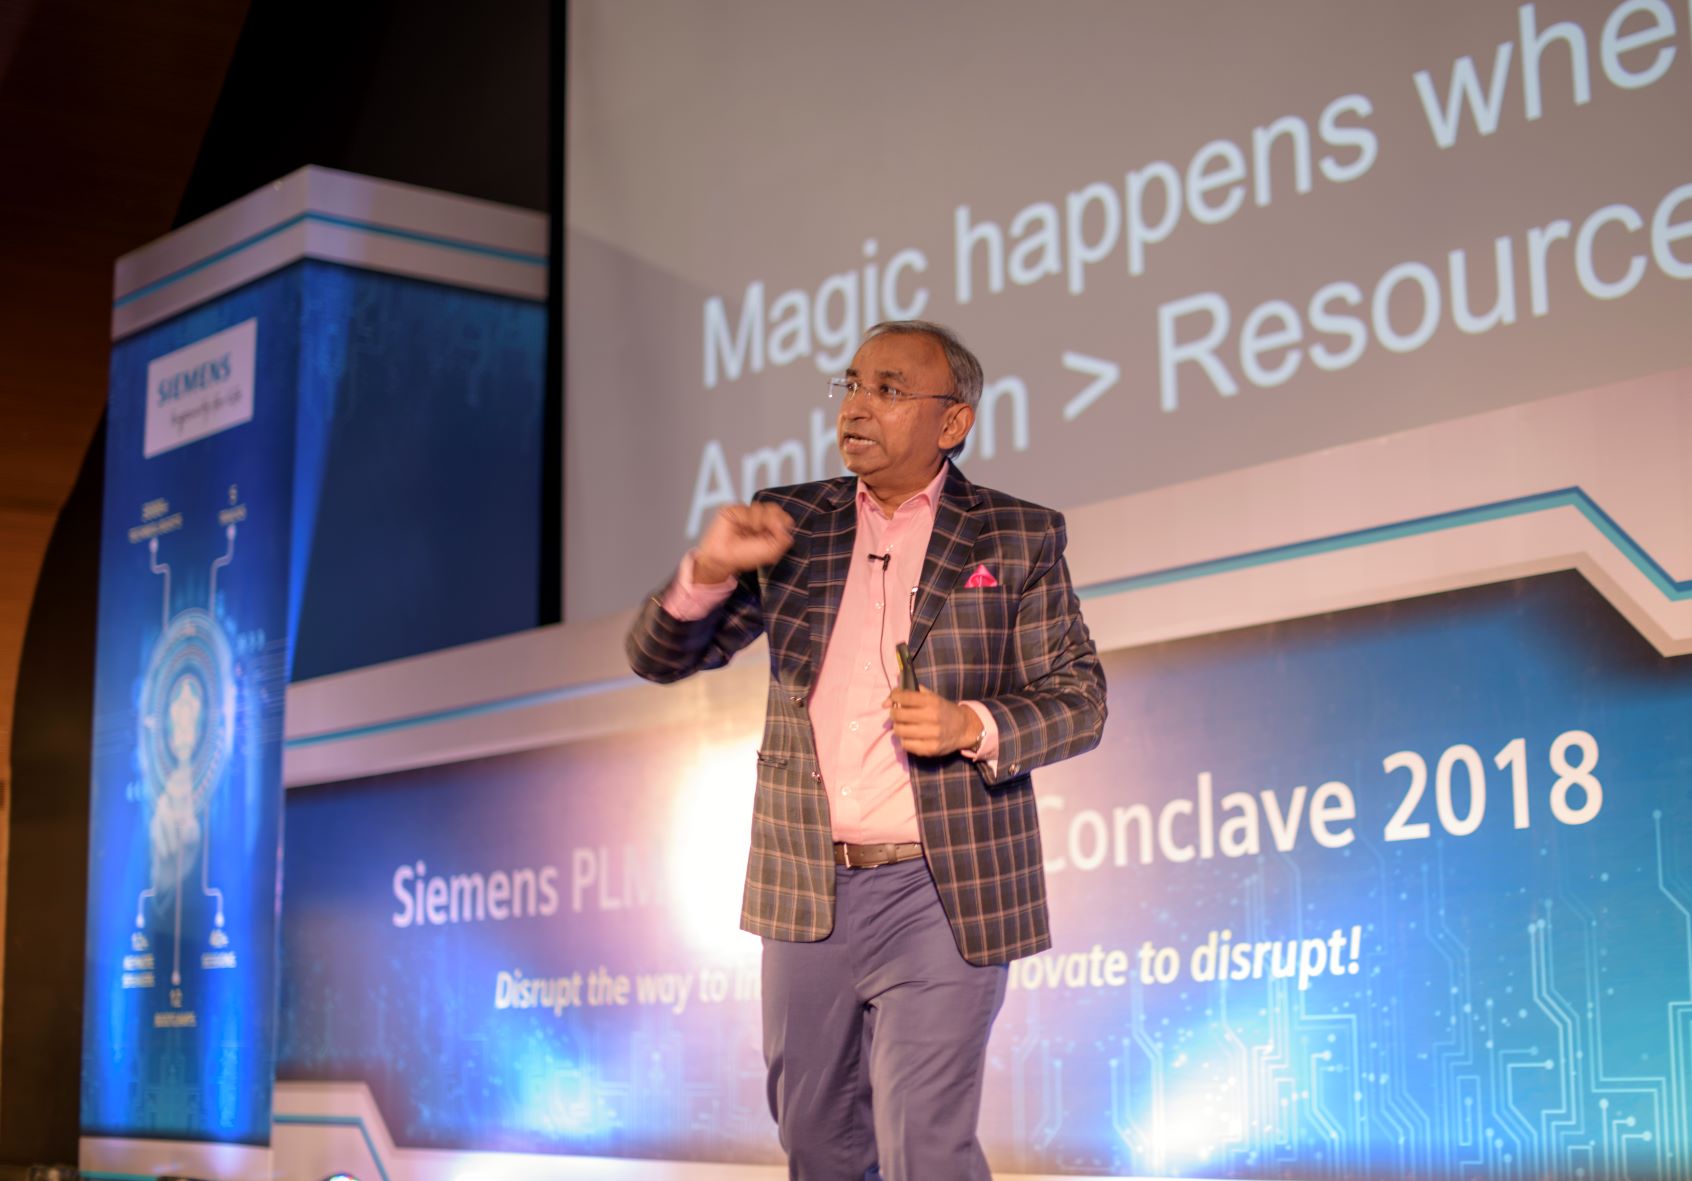 Speaker on stage at Siemens PLM Technology Conclave 2018